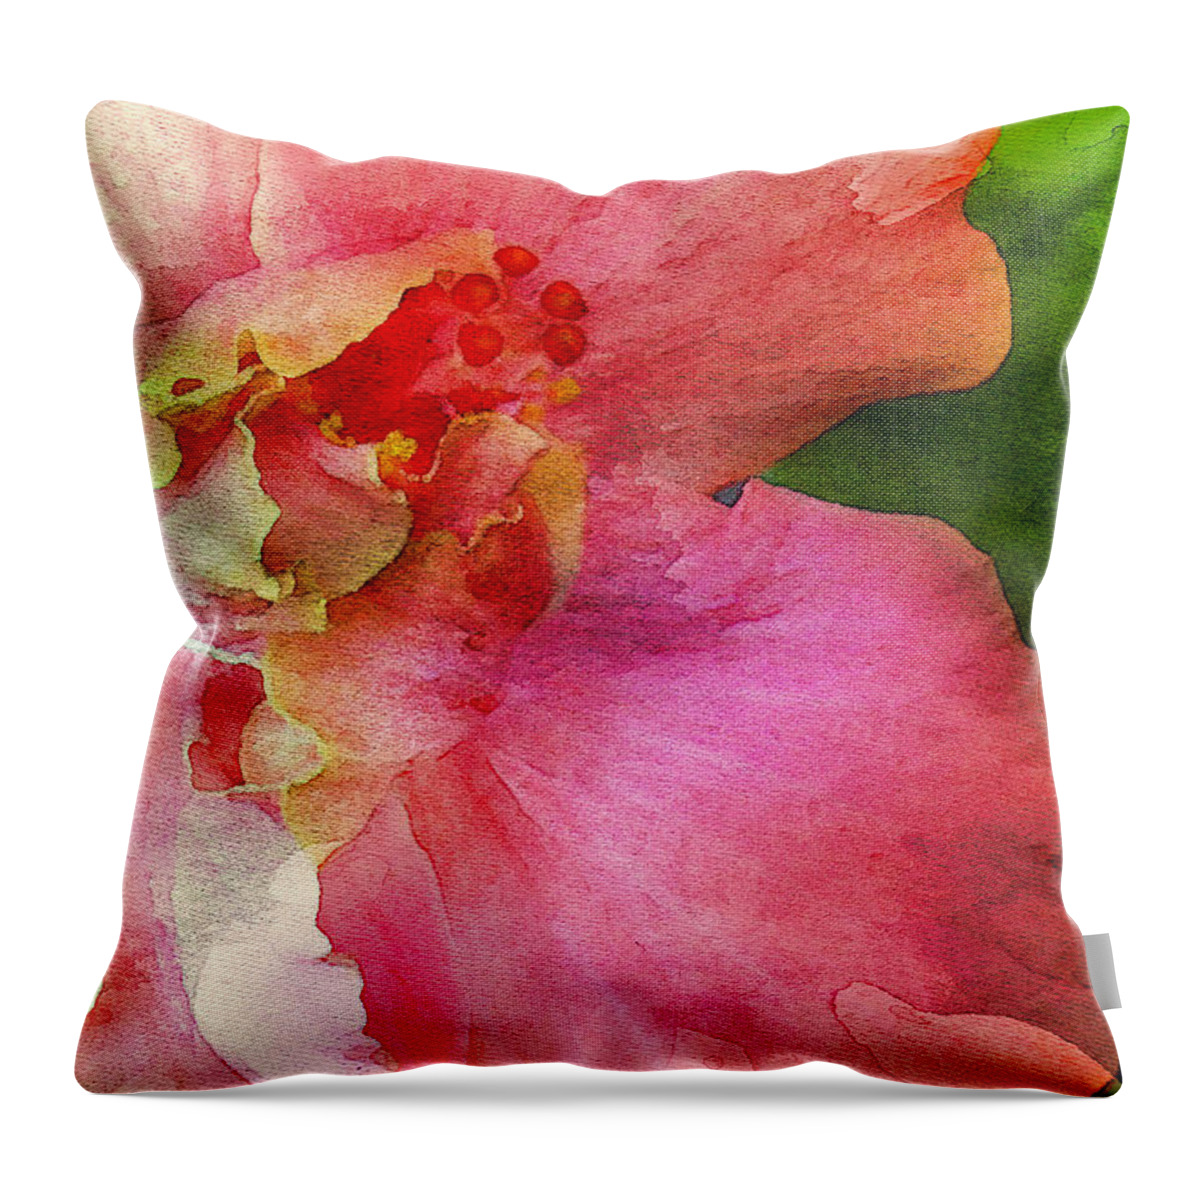 Pink Hibiscus Watercolor Throw Pillow featuring the digital art A Splash Of Color by James Temple